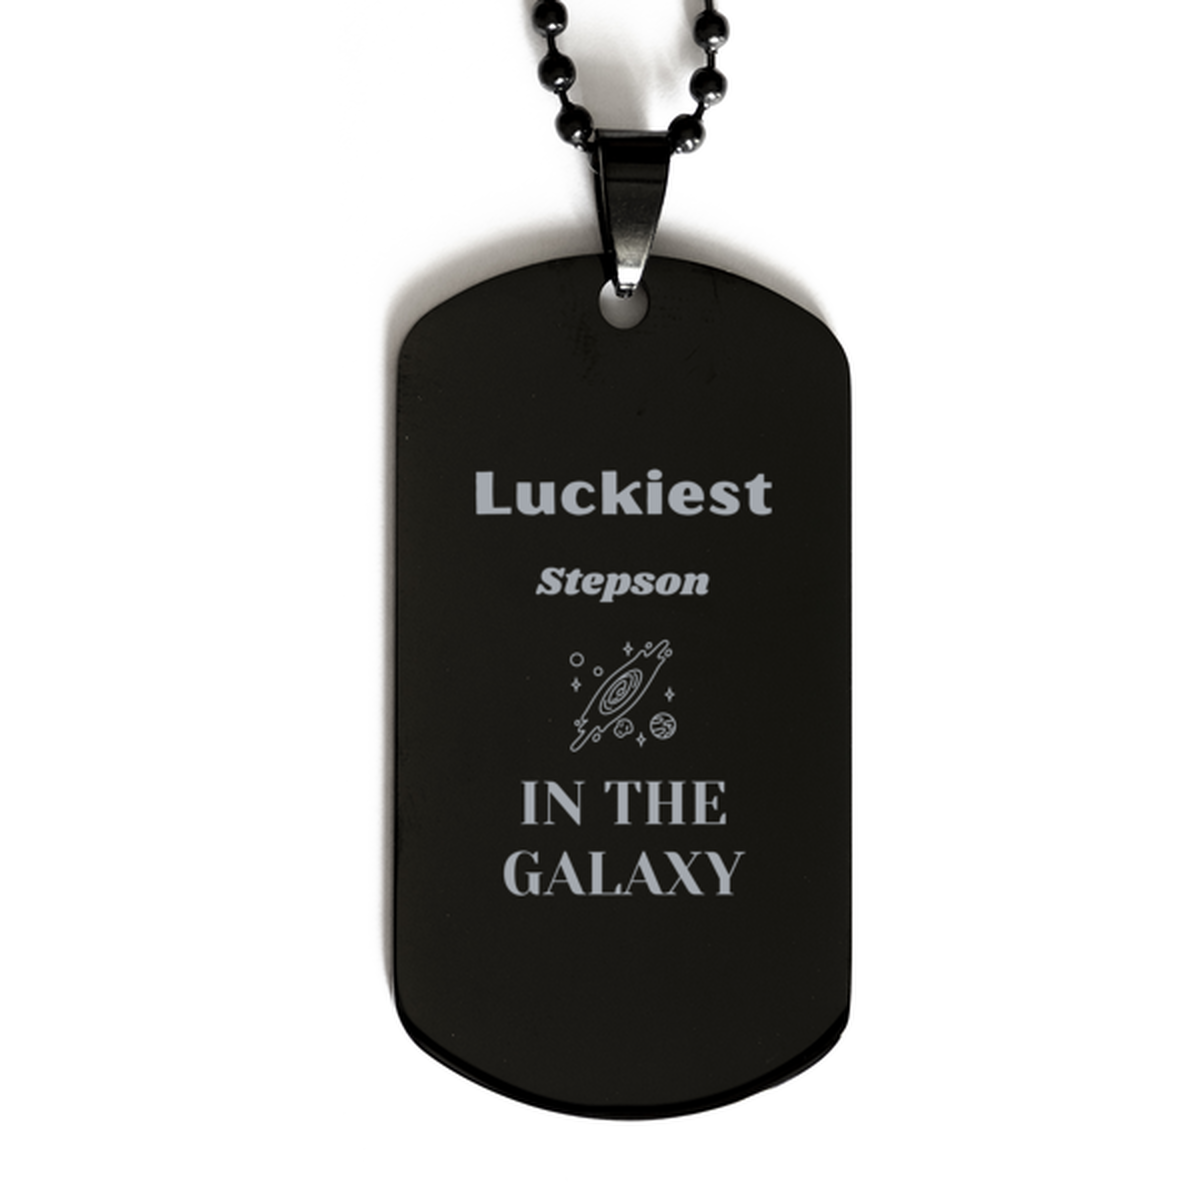 Luckiest Stepson in the Galaxy, To My Stepson Engraved Gifts, Christmas Stepson Black Dog Tag Gifts, X-mas Birthday Unique Gifts For Stepson Men Women